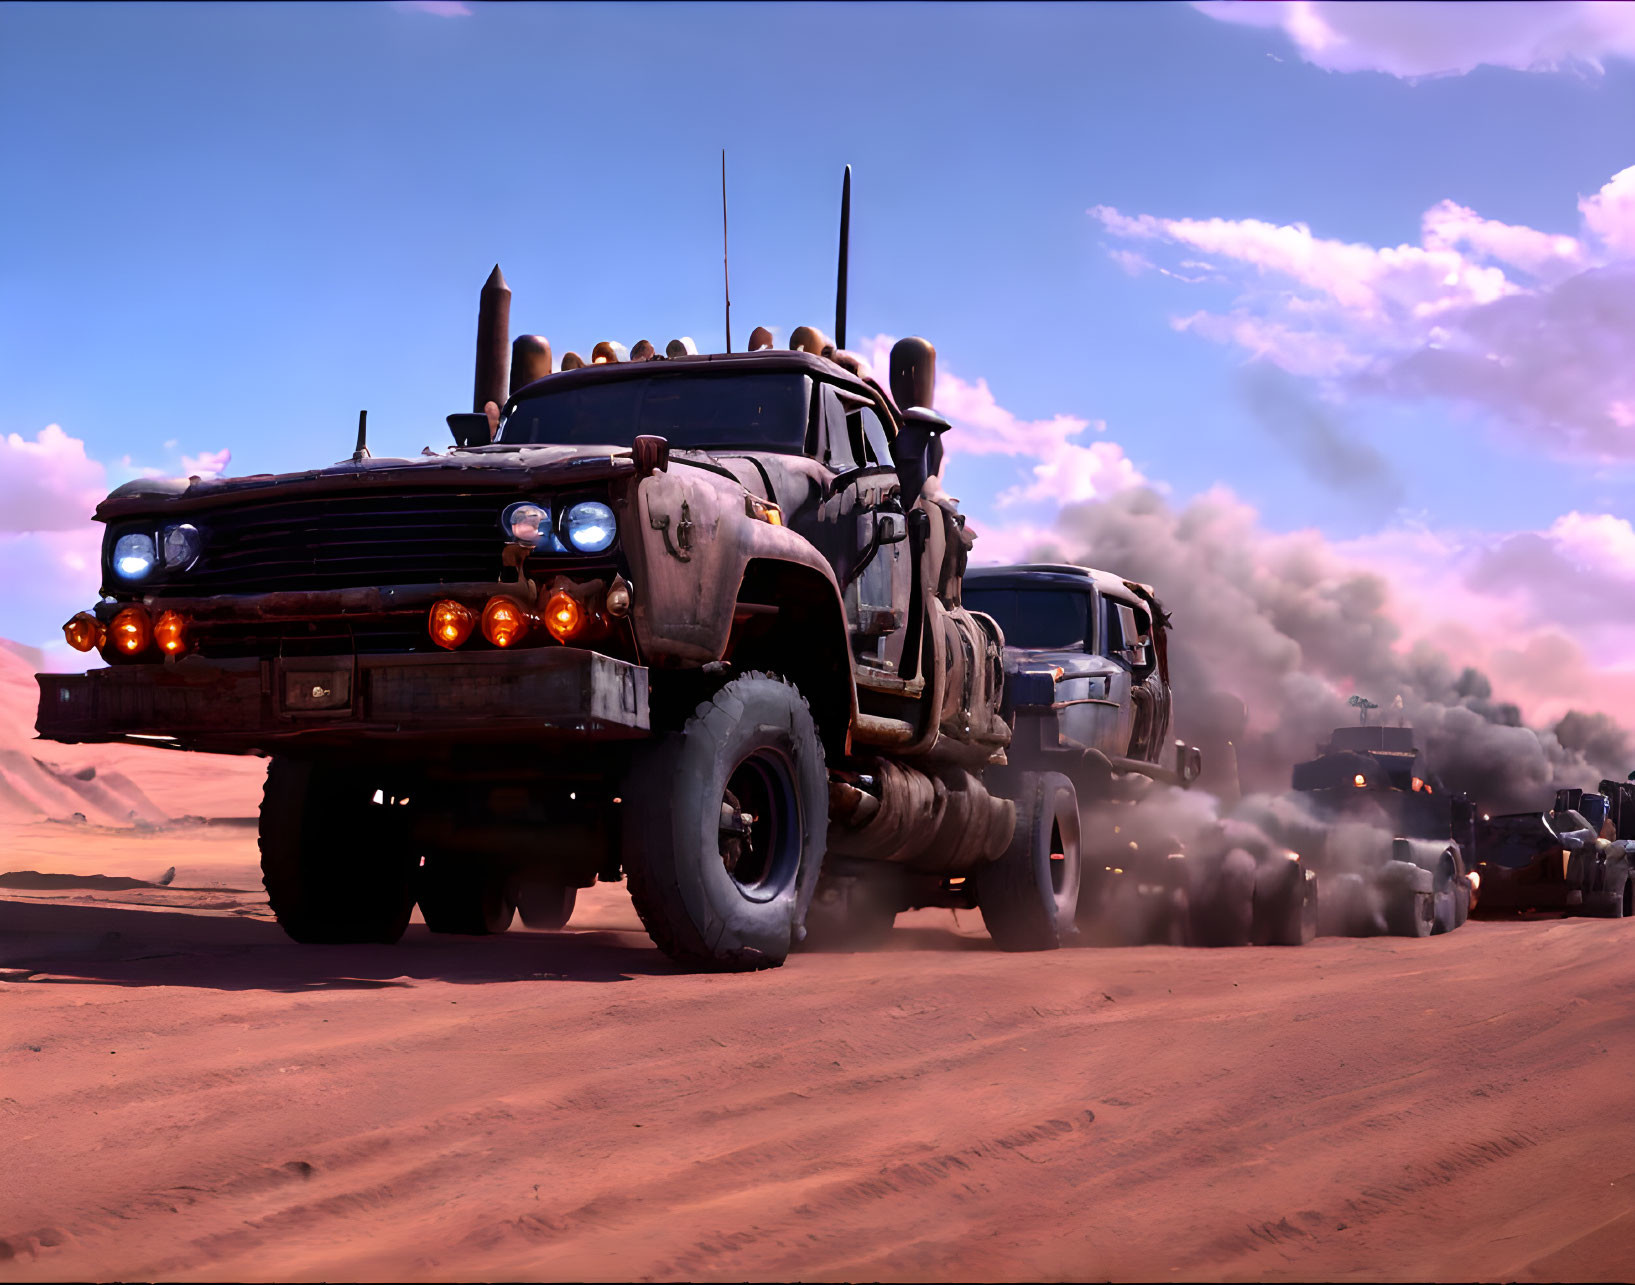 Modified truck with large tires leading convoy in barren landscape under pinkish sky